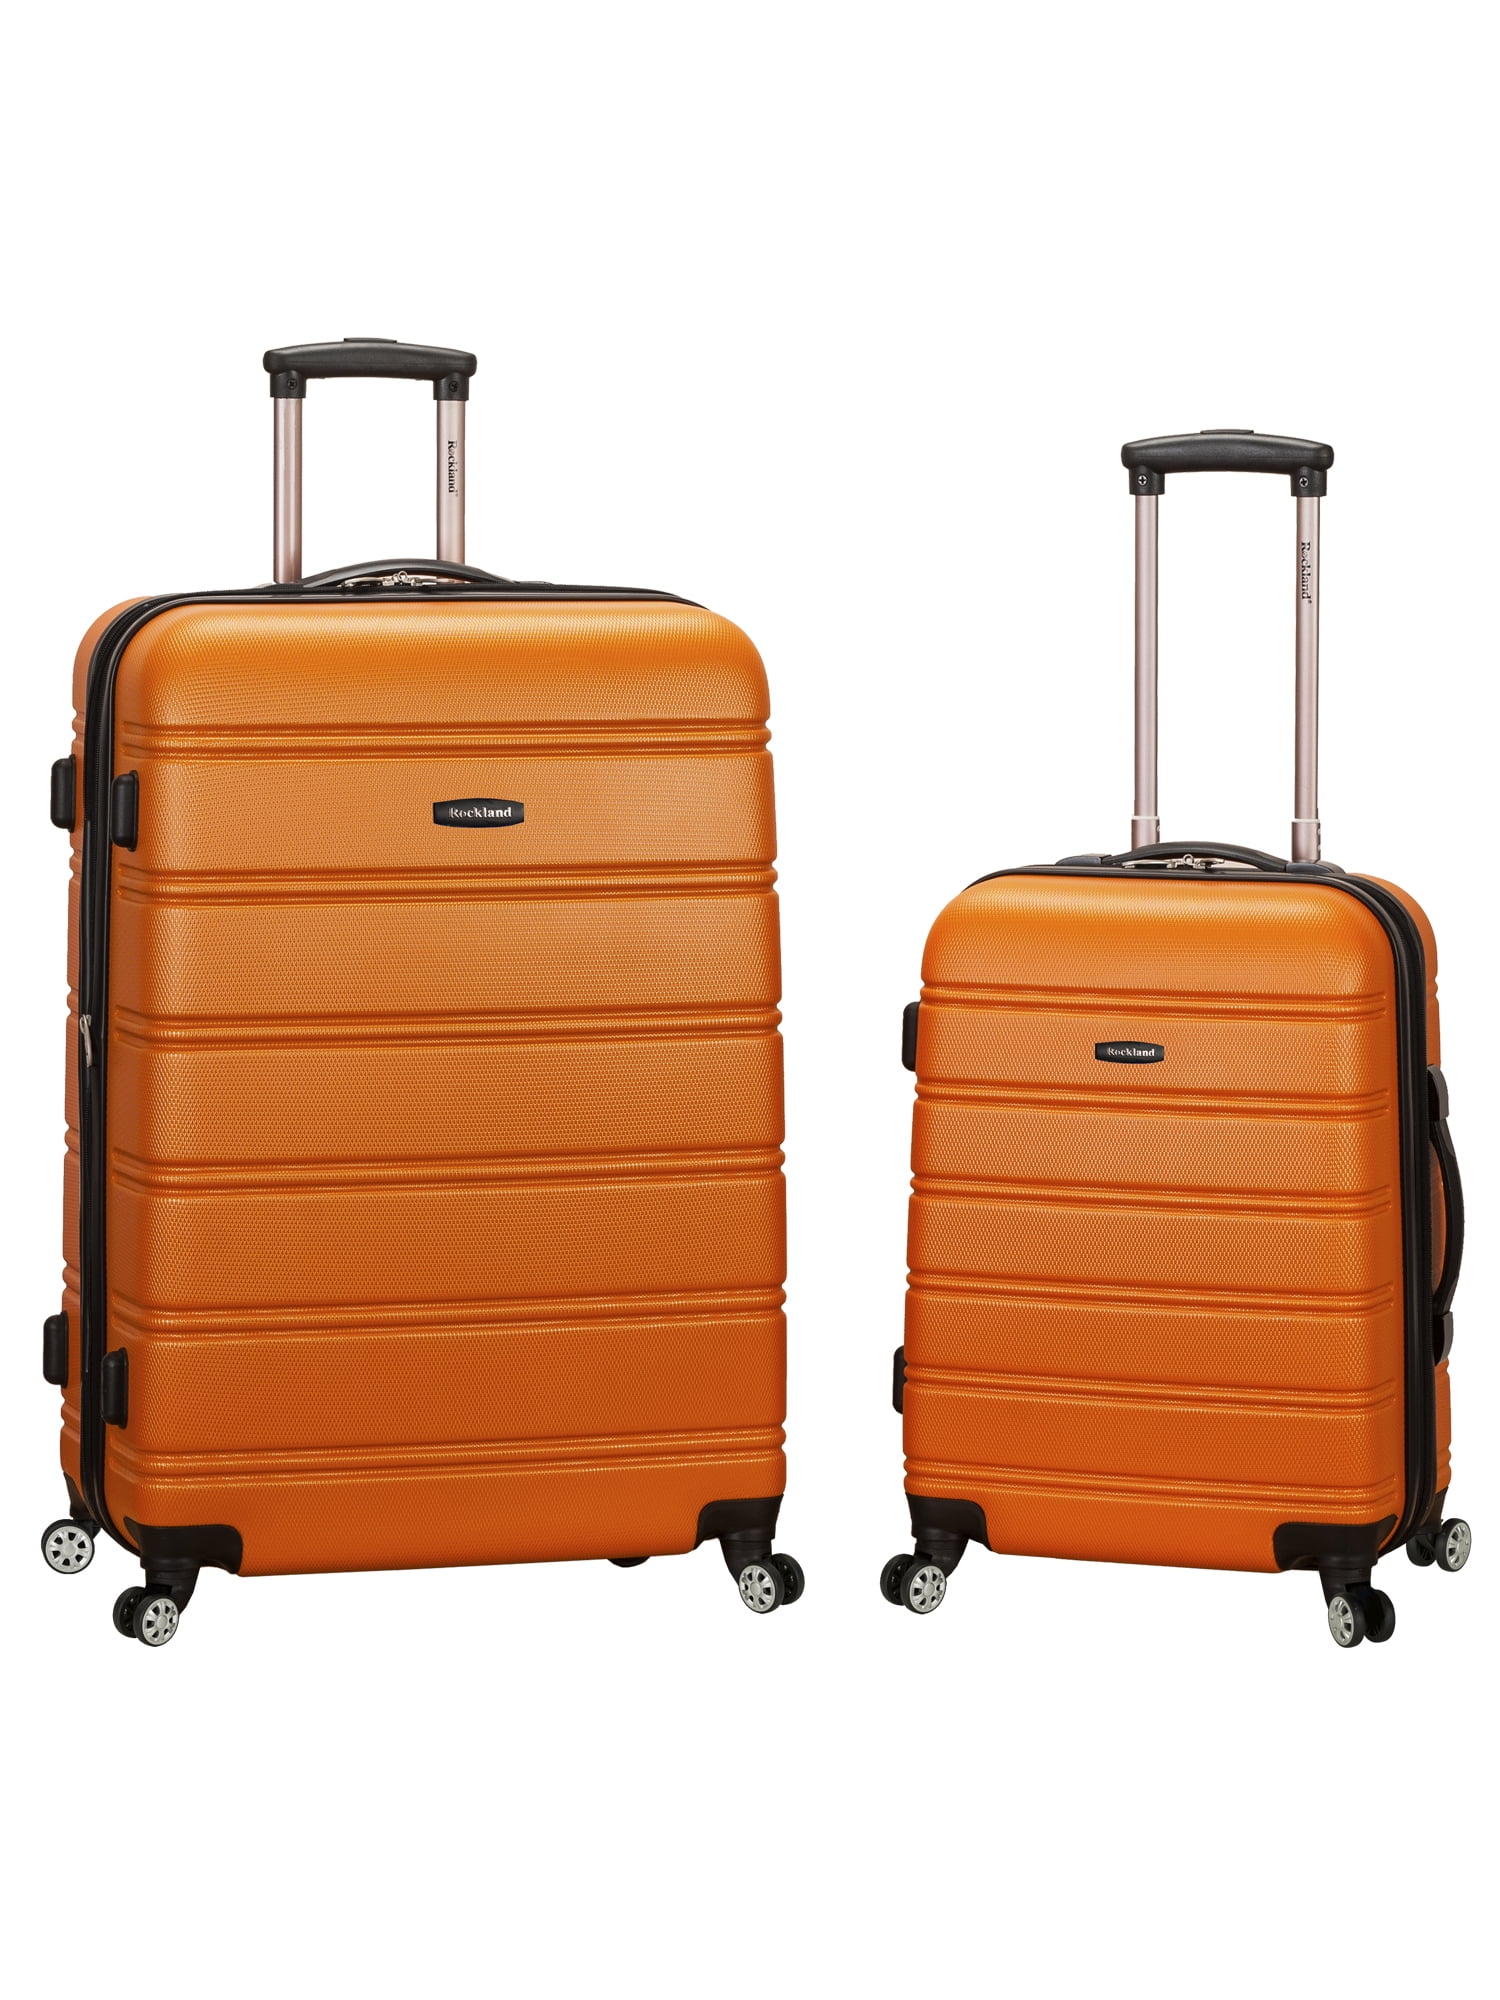 Carry-On Luggage Spinner Luggage Luggage Rockland Unisex-Adult 20 Expandable Carry On 